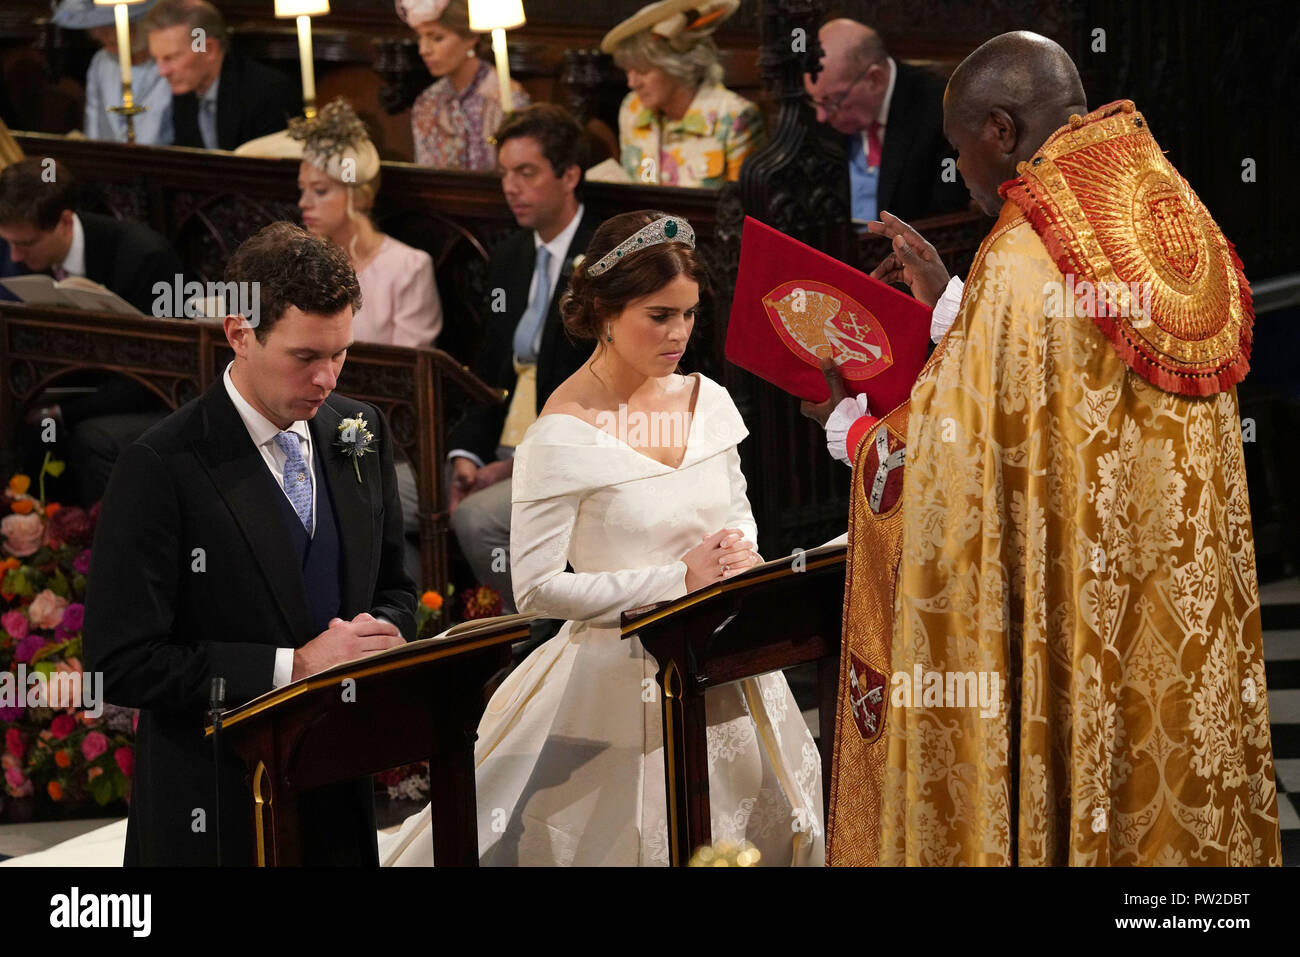 the-archbishop-of-york-dr-john-sentamu-during-the-wedding-of-princess-eugenie-to-jack-brooksbank-at-st-georges-chapel-in-windsor-castle-PW2DBT.jpg